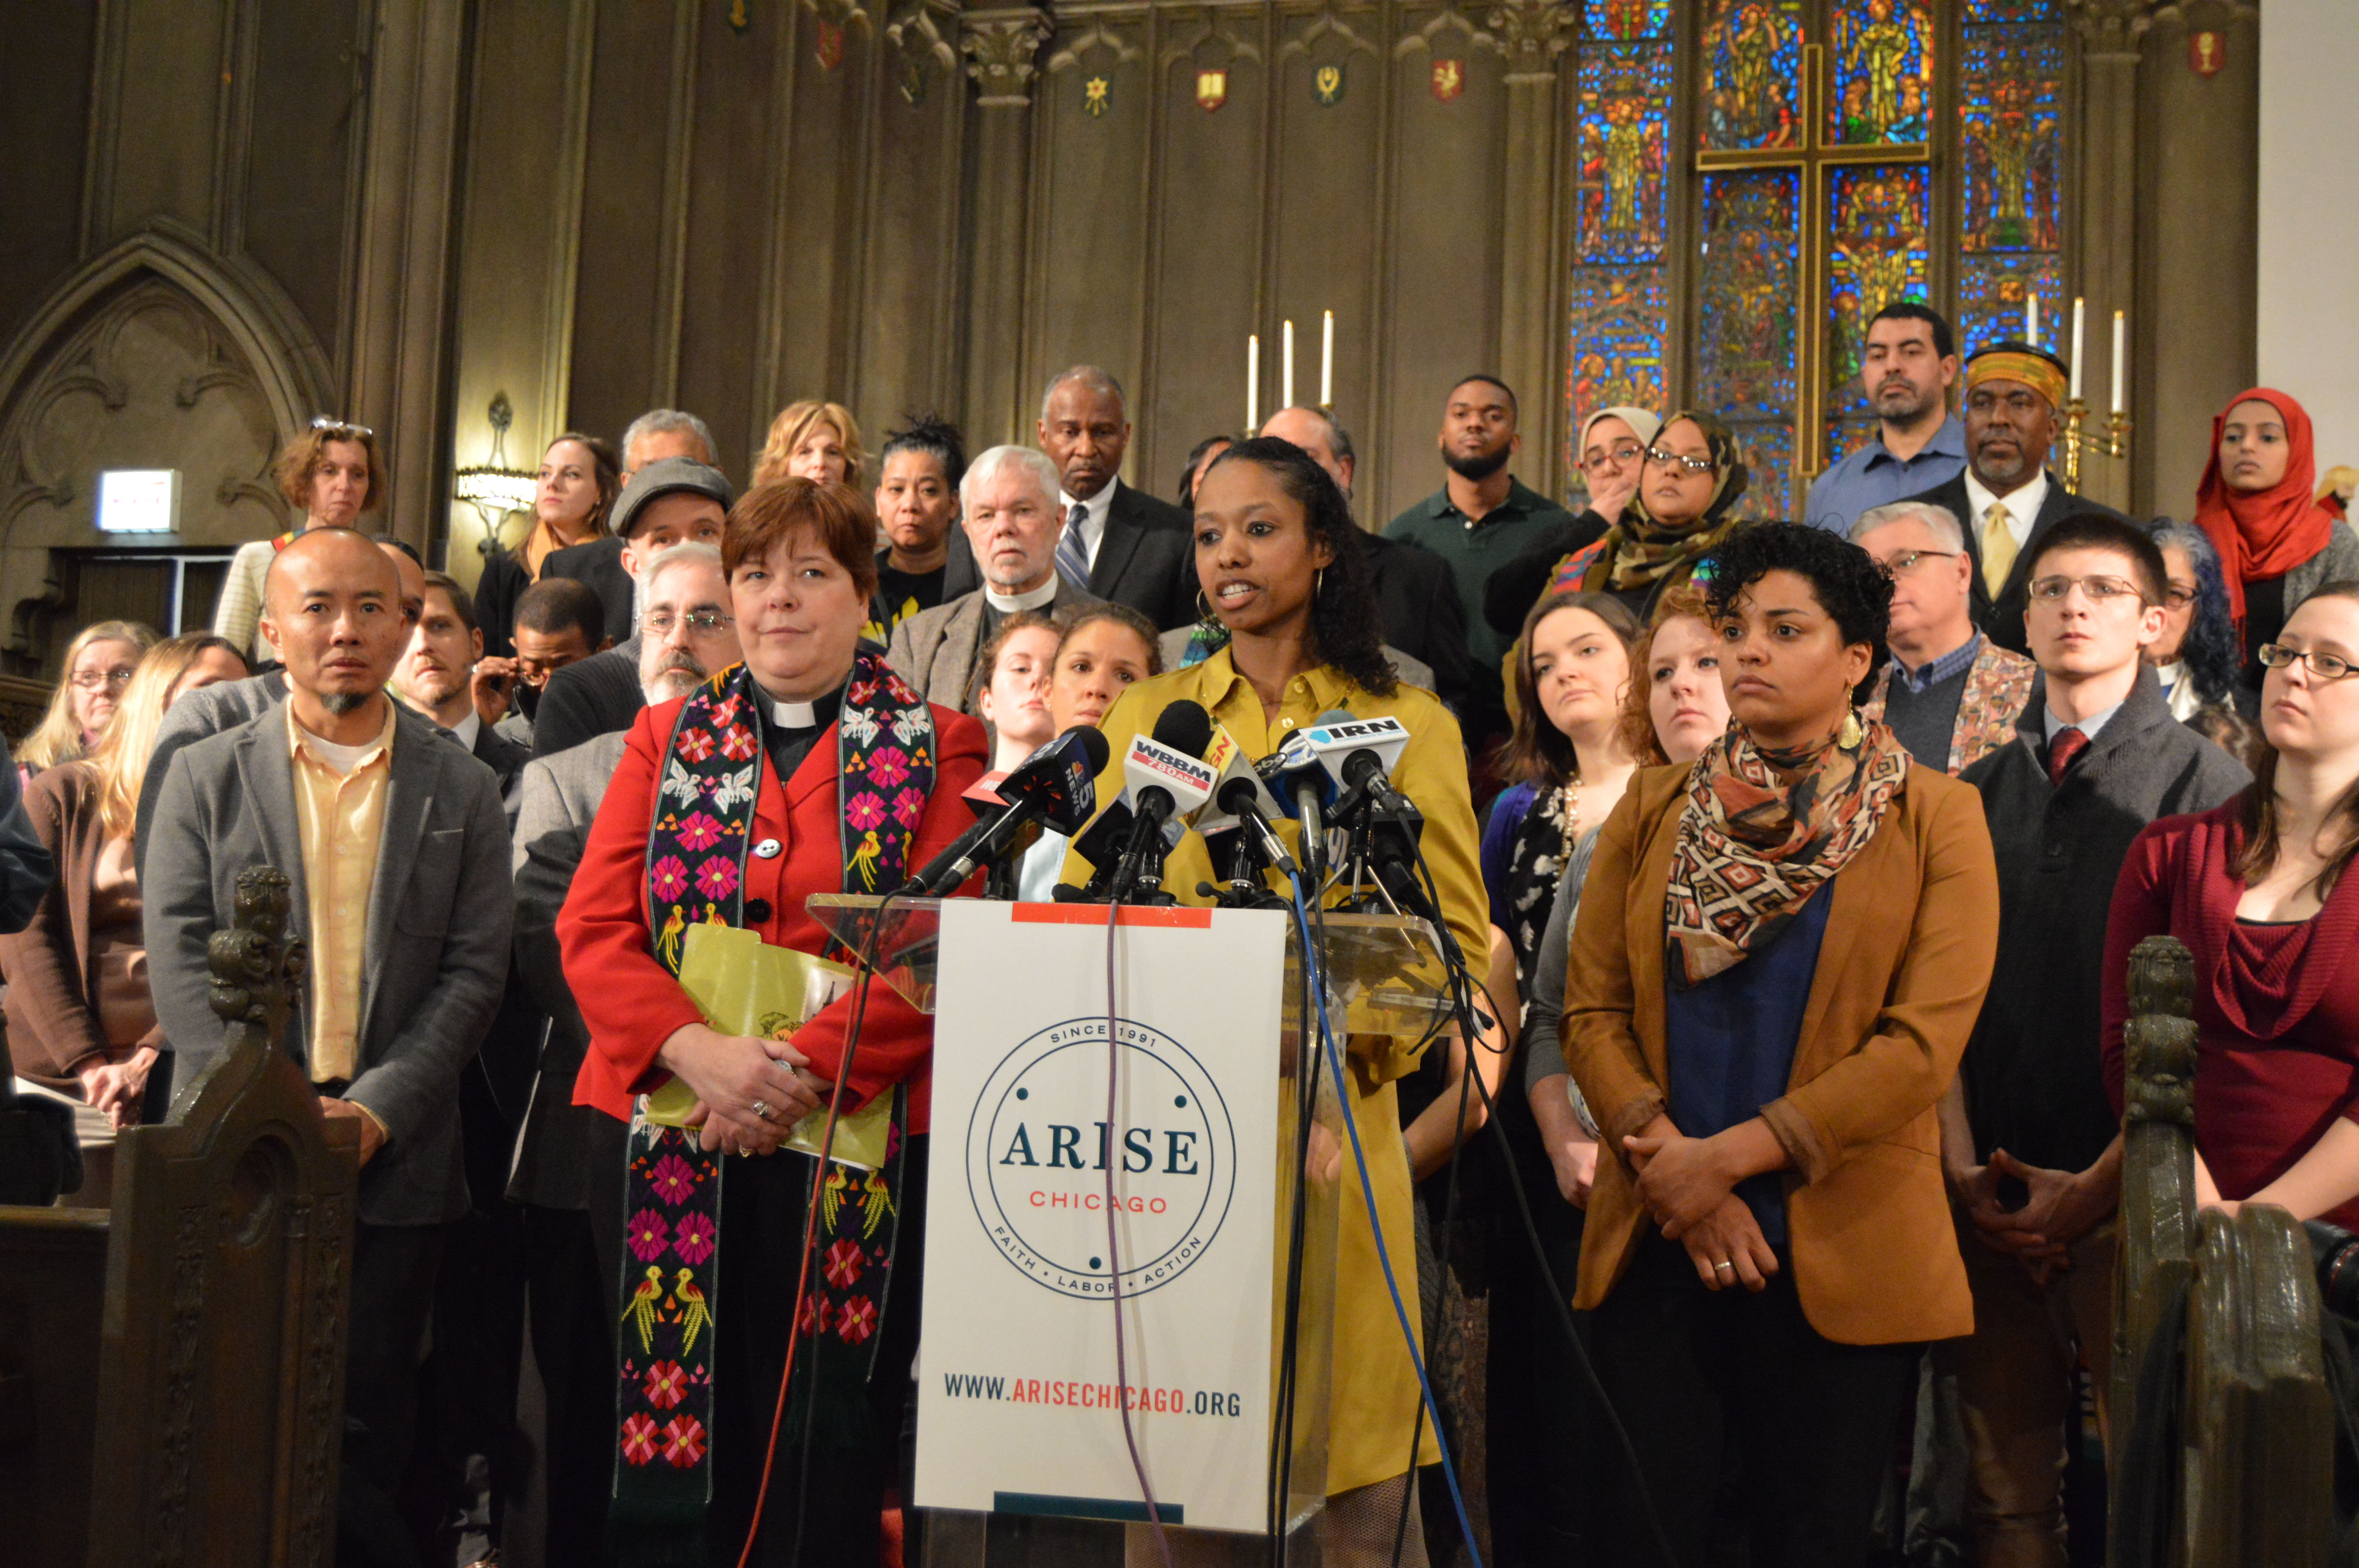 Prof. Larycia Hawkins told a news conference on January 6, "Wheaton College cannot scare me into walking away from the truth that all humans, Muslims, the vulnerable, the oppressed, are all my sisters and brothers."